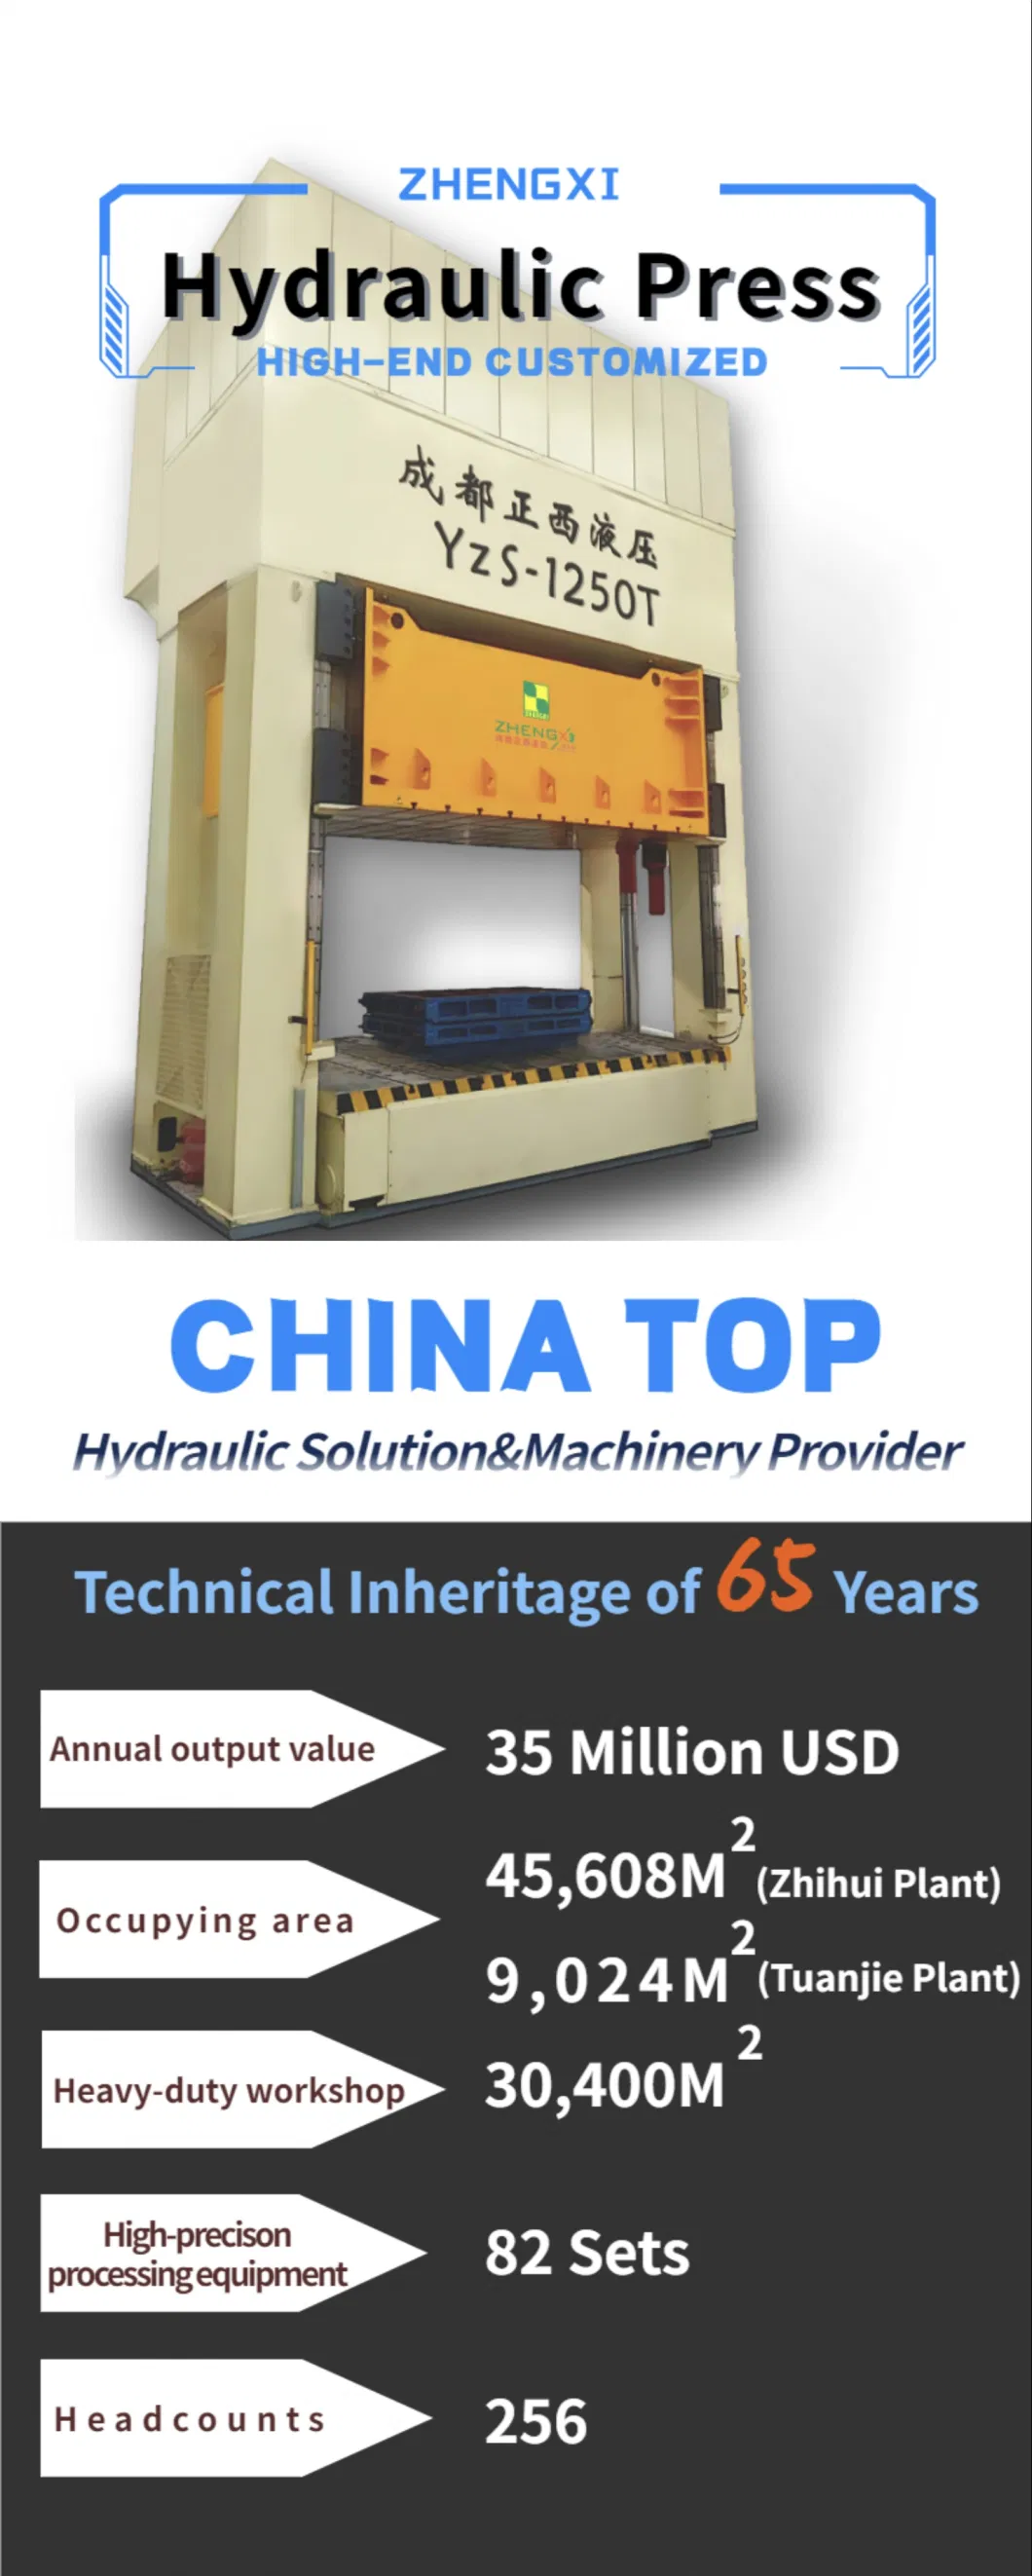 2400t Composite Material Hydraulic Press Machine for Thermoplastic Forming